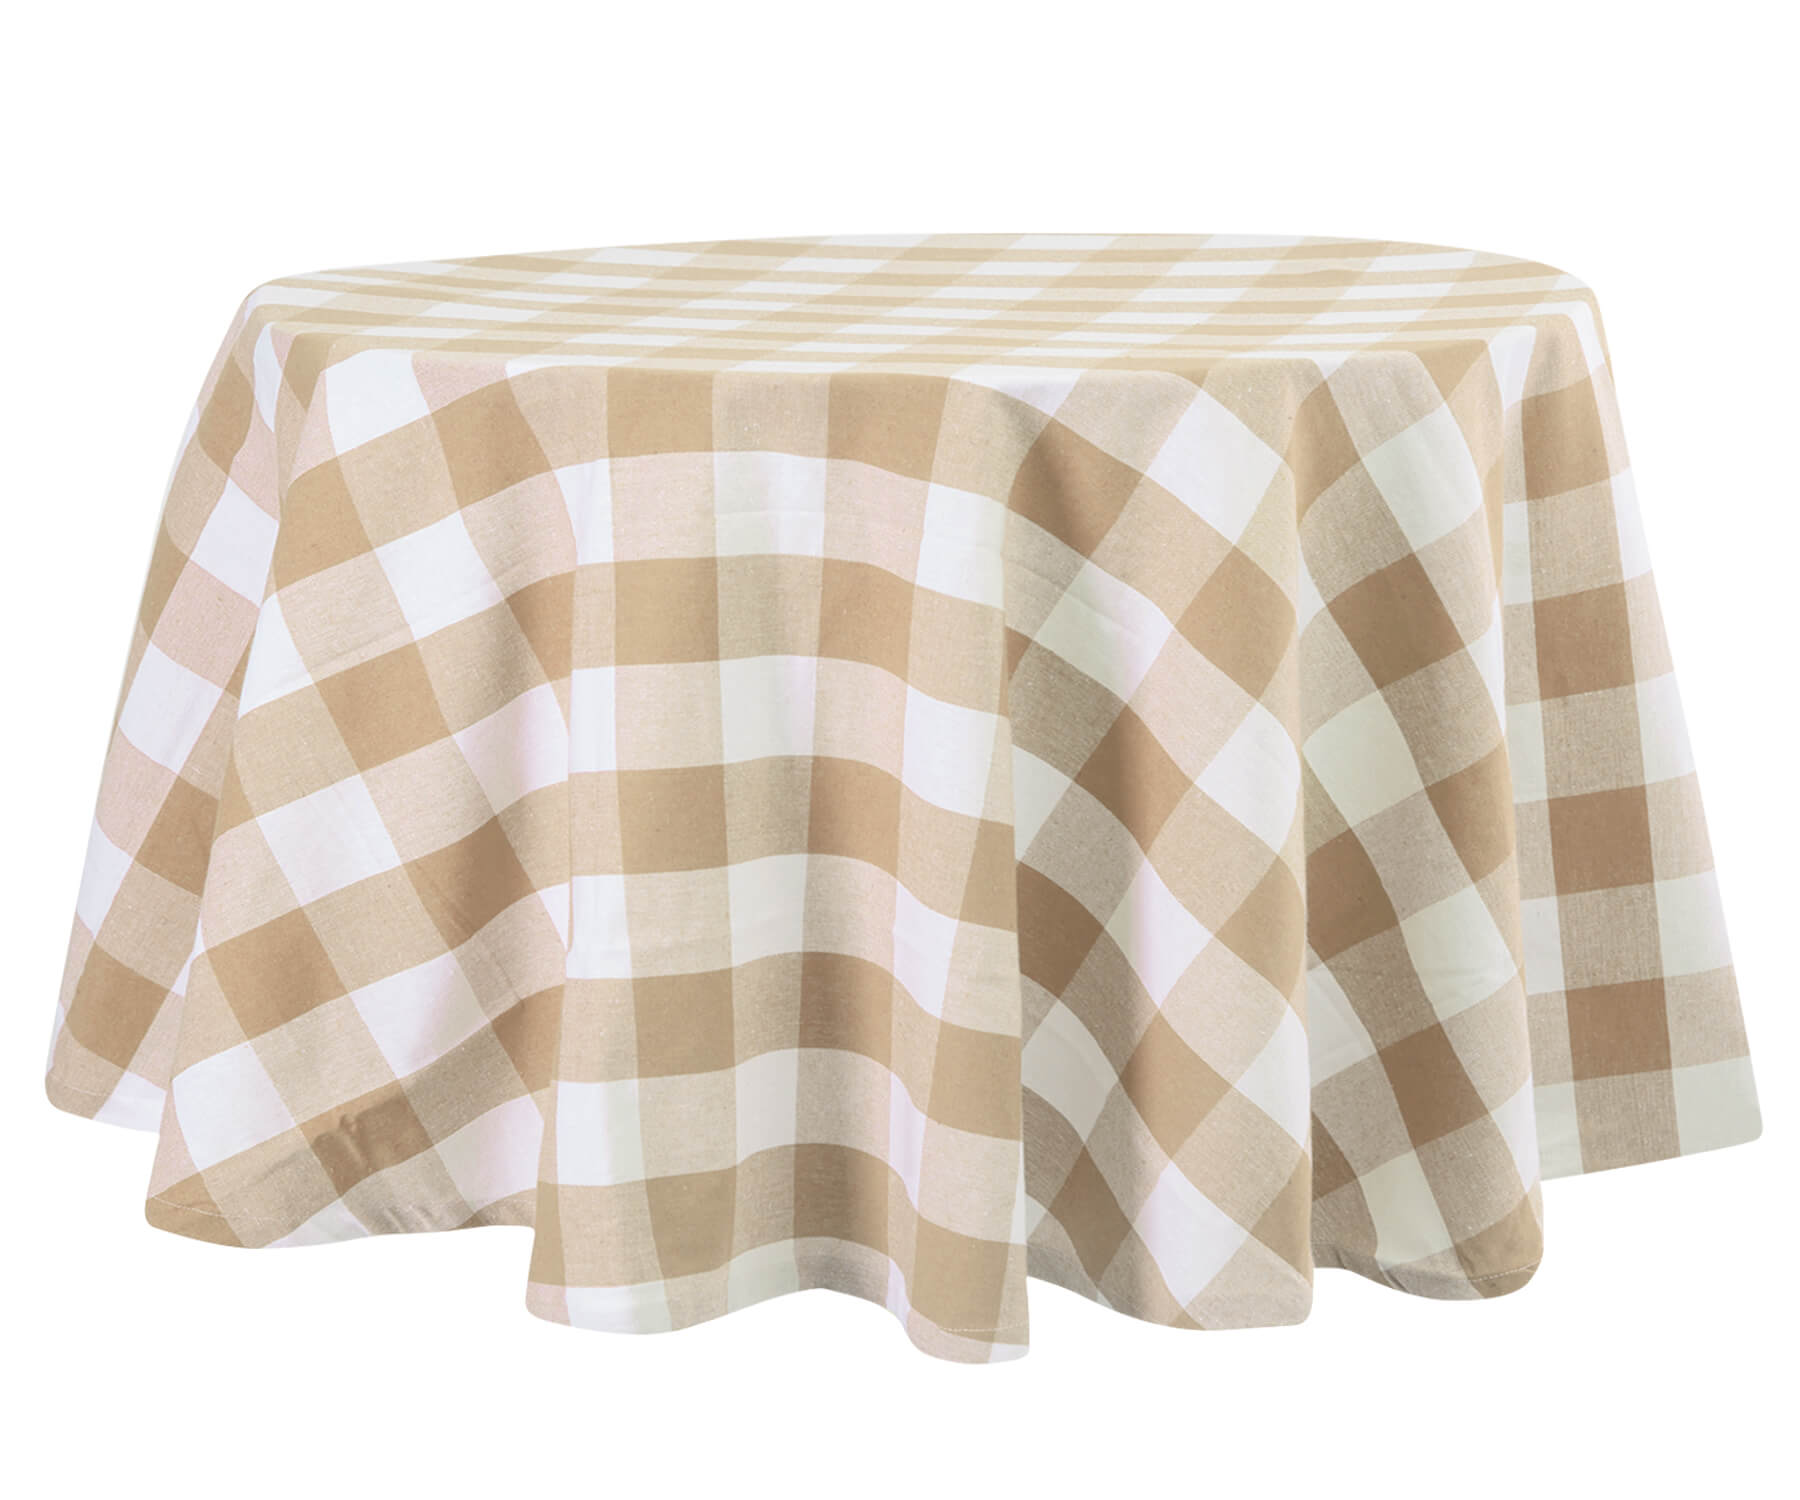 Round tablecloth featuring a blue and white gingham pattern